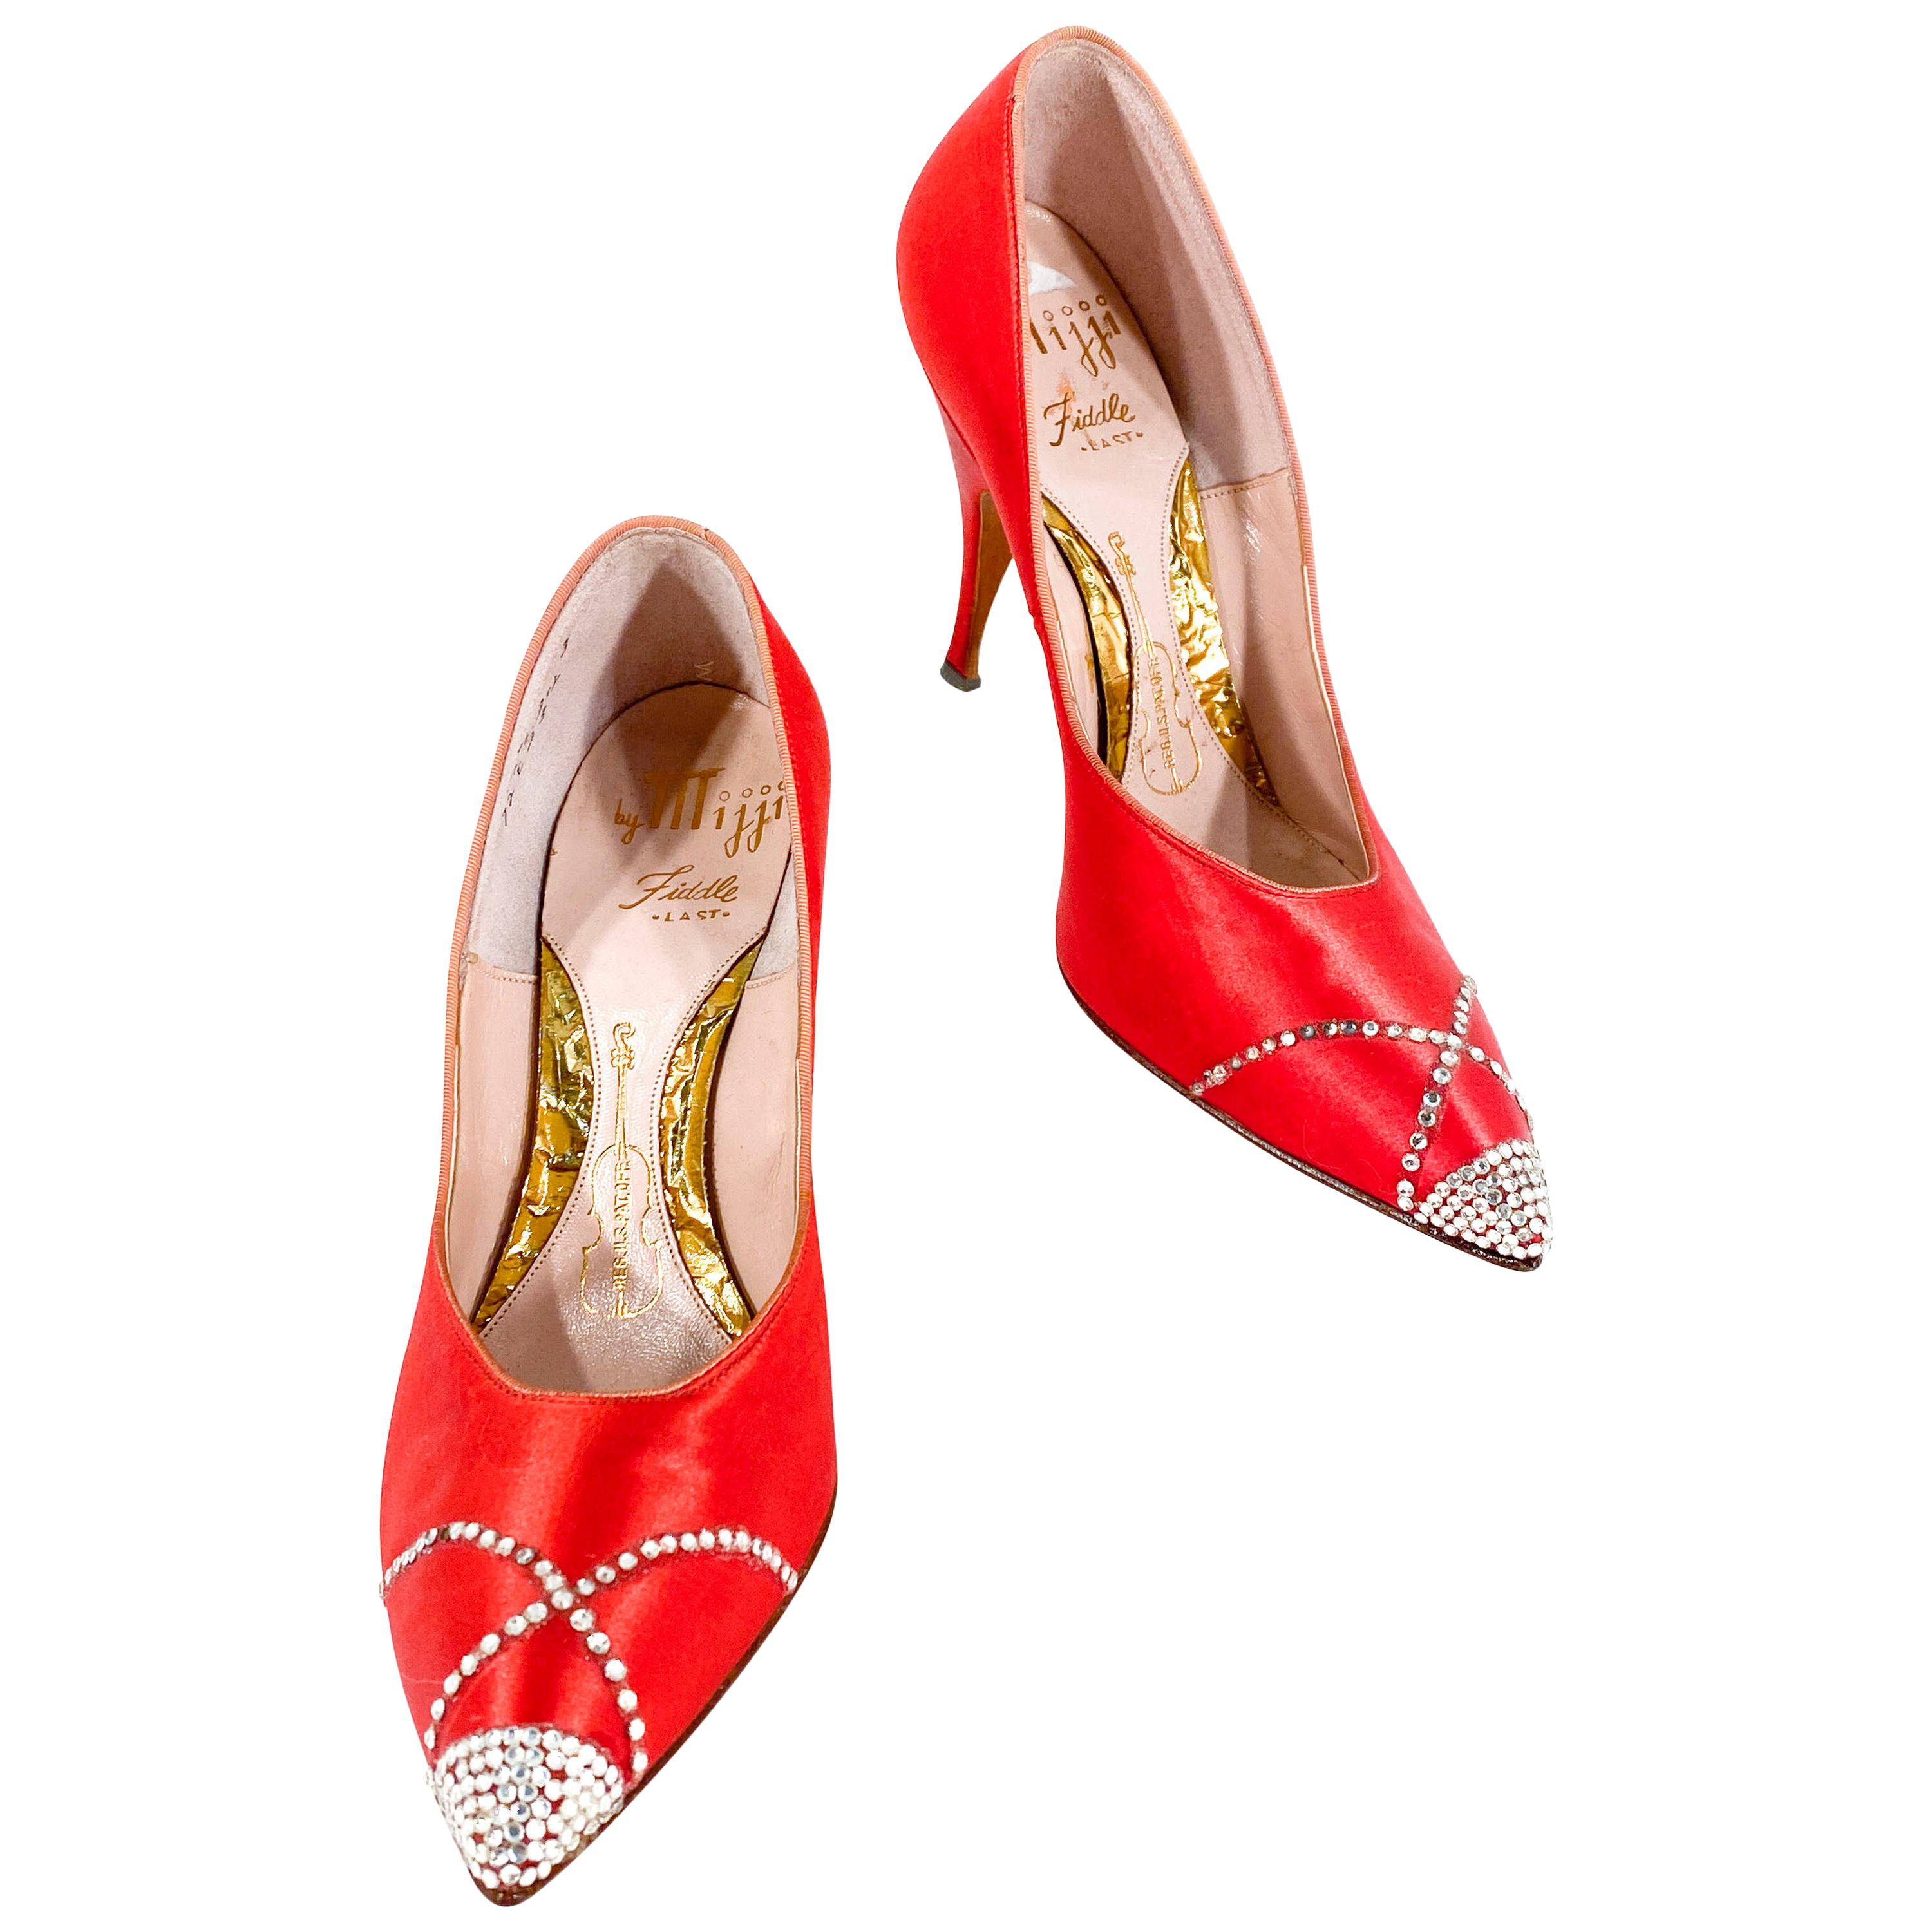 1960s Red Satin Stiletto Heels With Rhinestone Accents For Sale